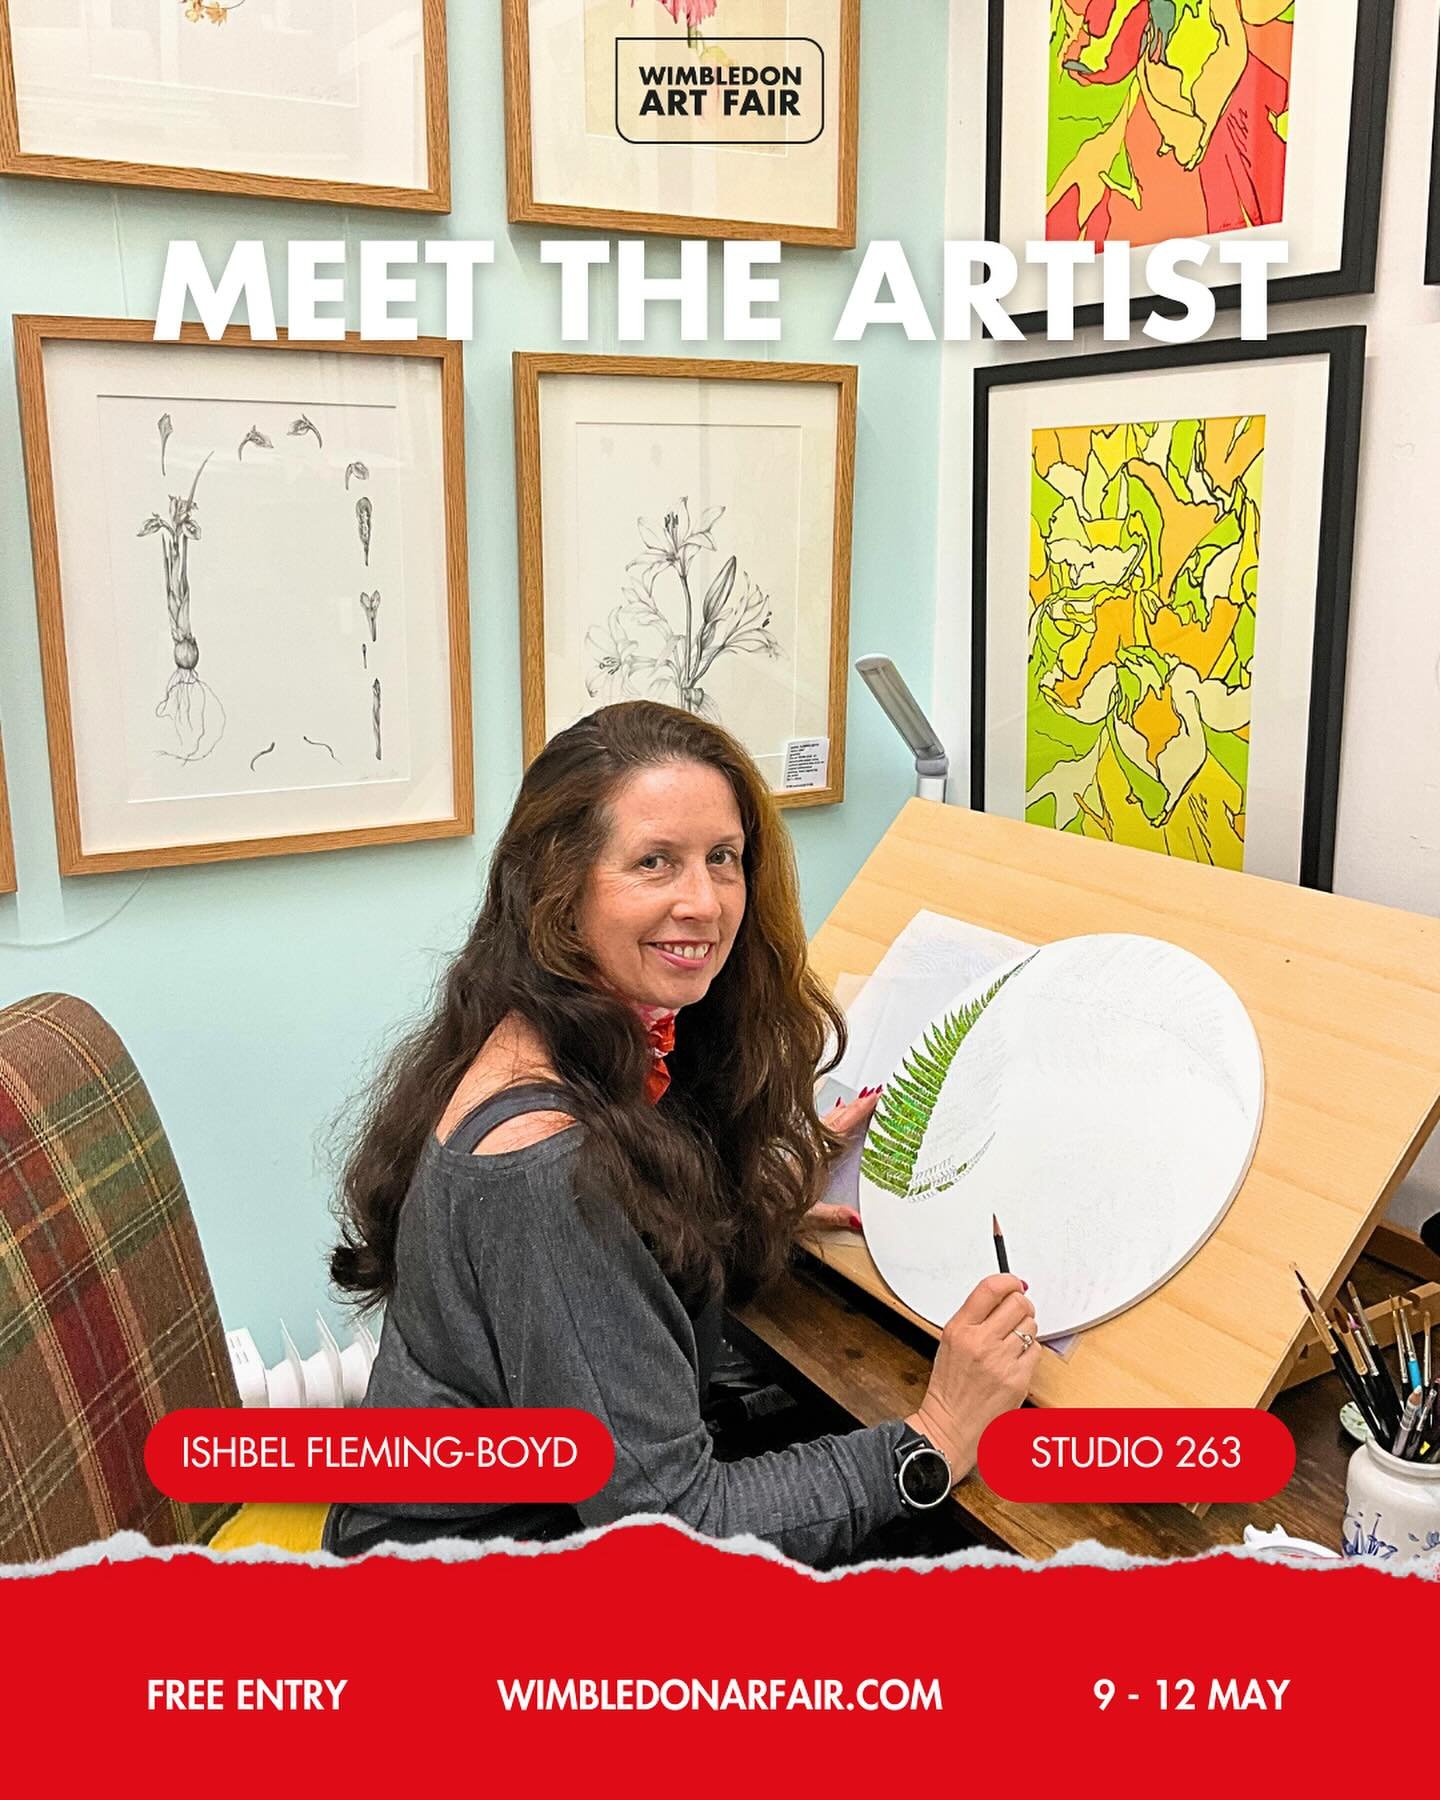 Meet Ishbel Fleming-Boyd | Studio 263 🔴

Discover the enchanting world of @ishbelflemingboyd.artist, a Scottish artist bringing the vibrancy of botanical beauty to South West London. Ishbel&rsquo;s love affair with Botanical Art began in her youth, 